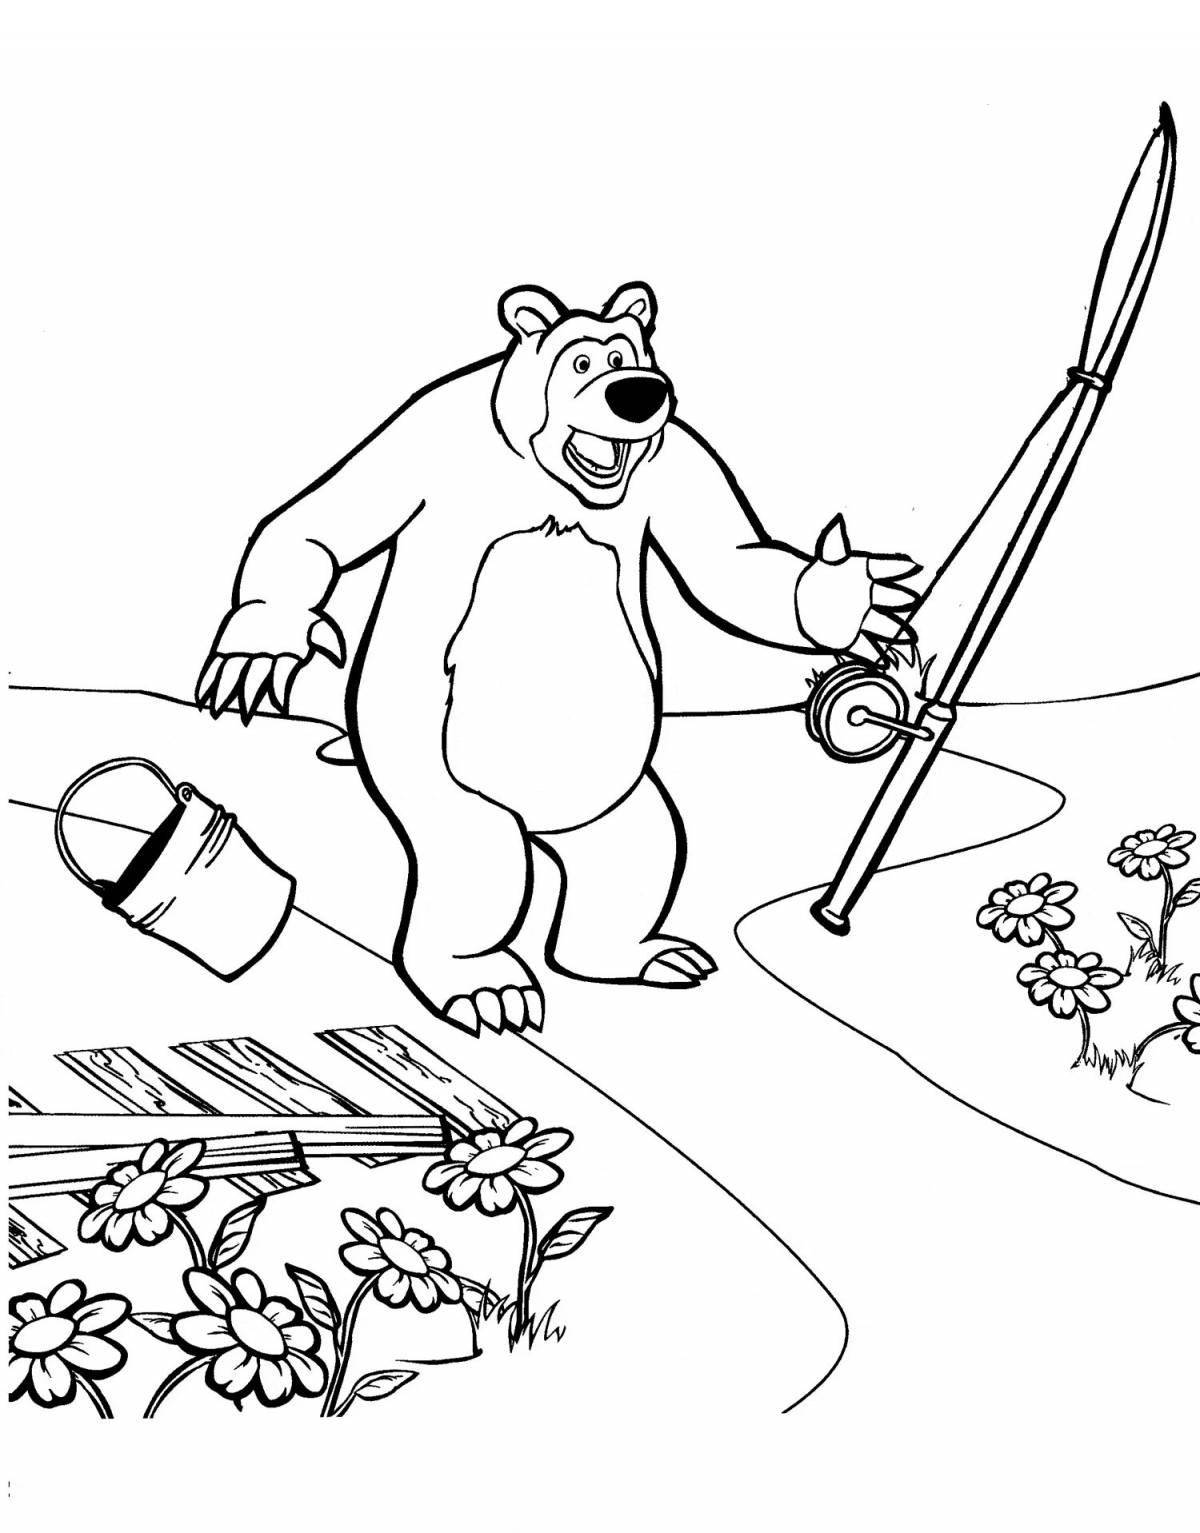 Humorous mouse and masha coloring book